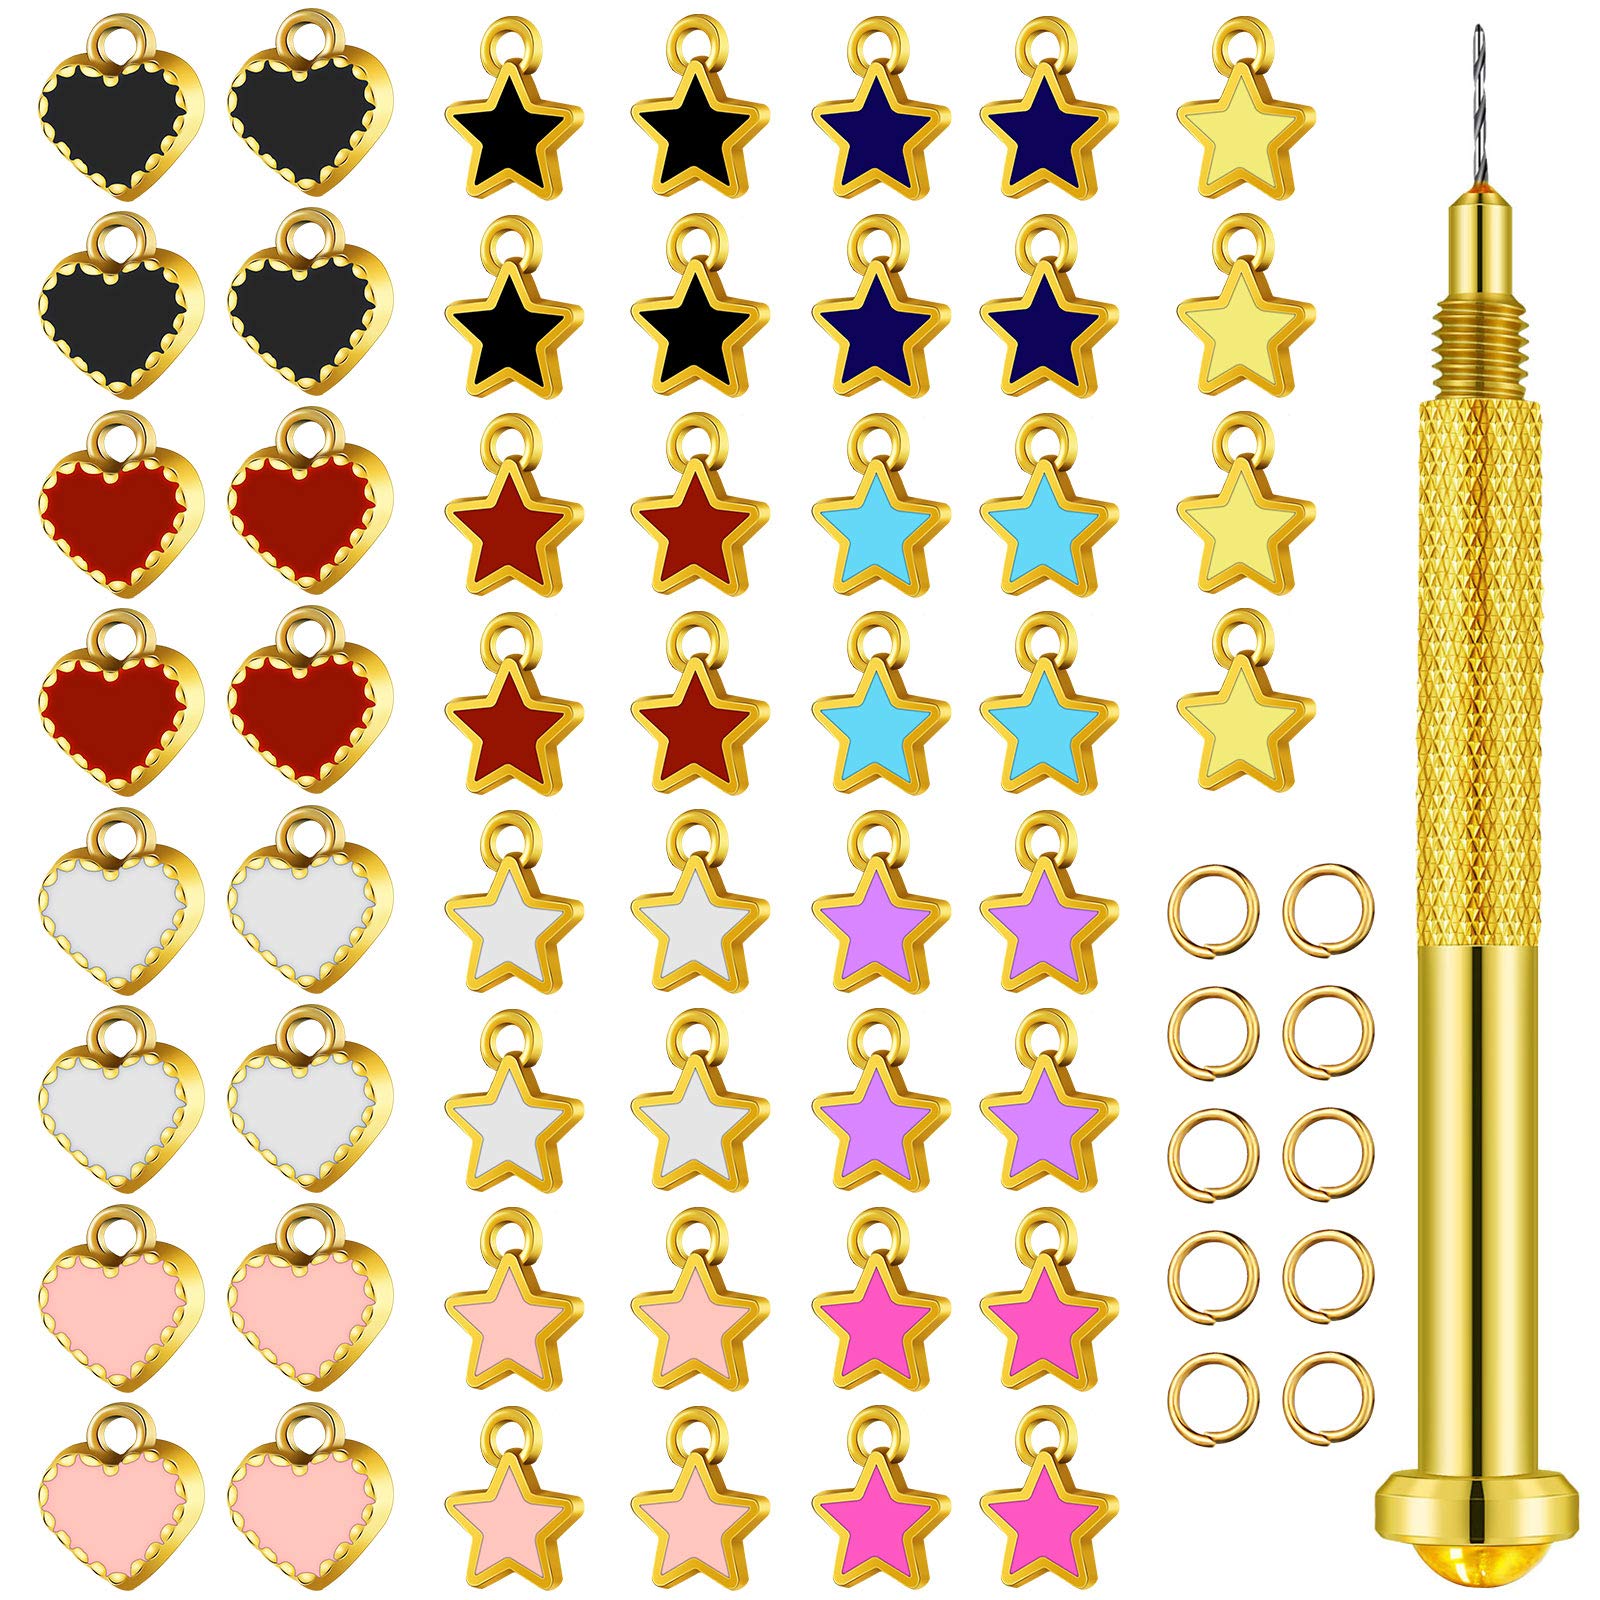 Gold Nail Art Dangle Piercing Hand Drill Use to Pierce a Hole on the Nail  Tip to Add Dangles or Rings - Etsy